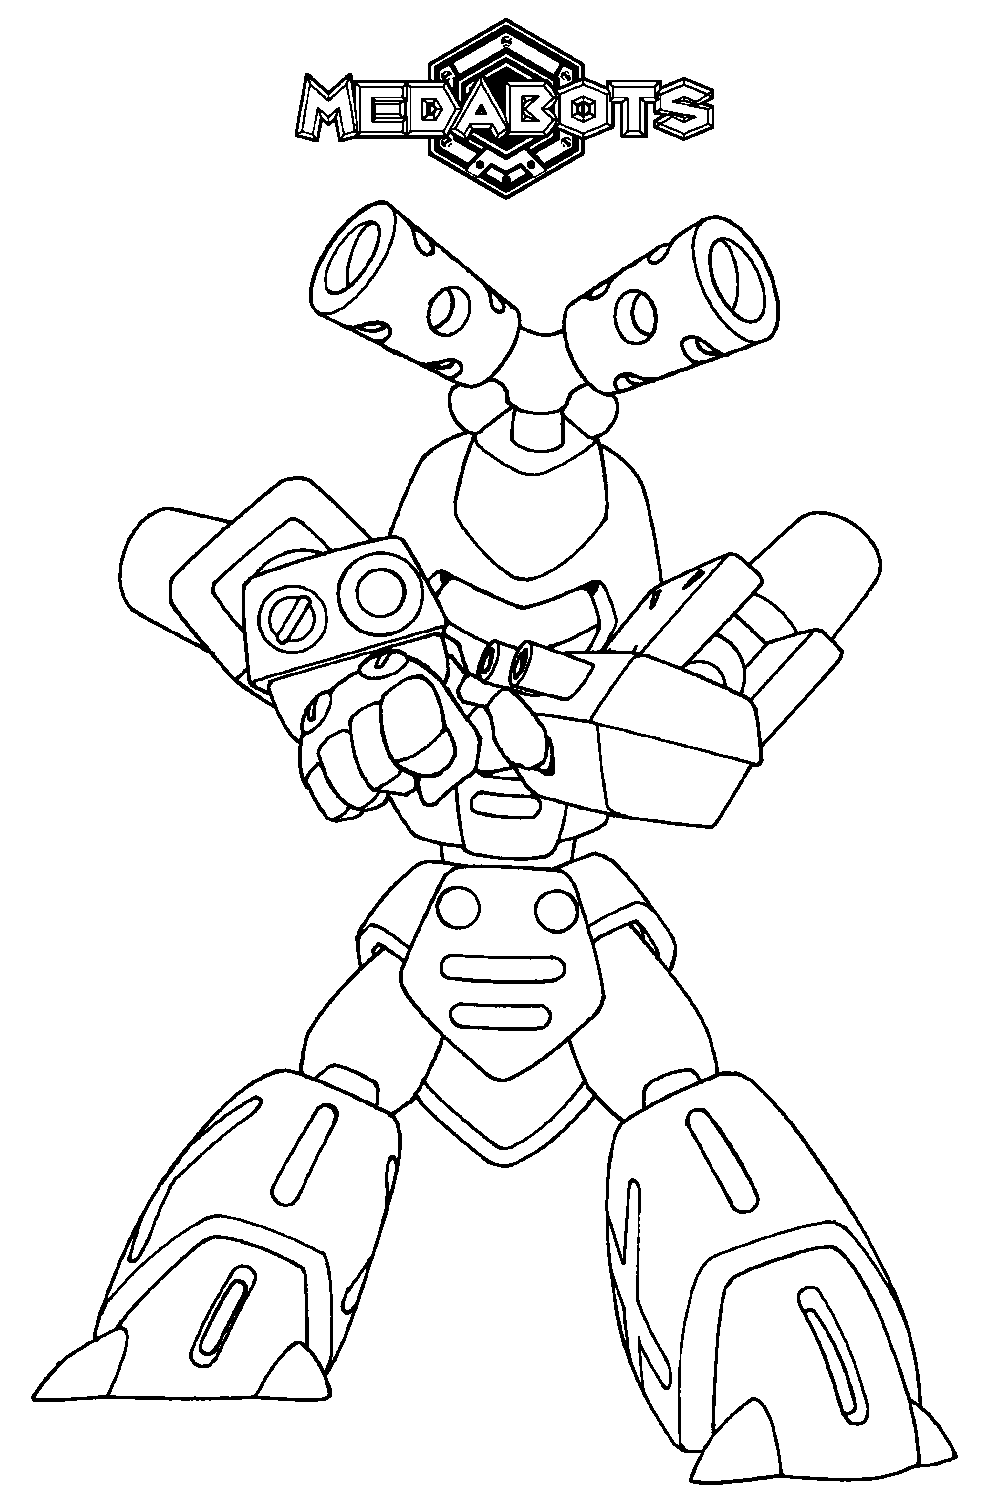 Medabots Coloring Pages TV Film medabots QwSgq Printable 2020 04935 Coloring4free